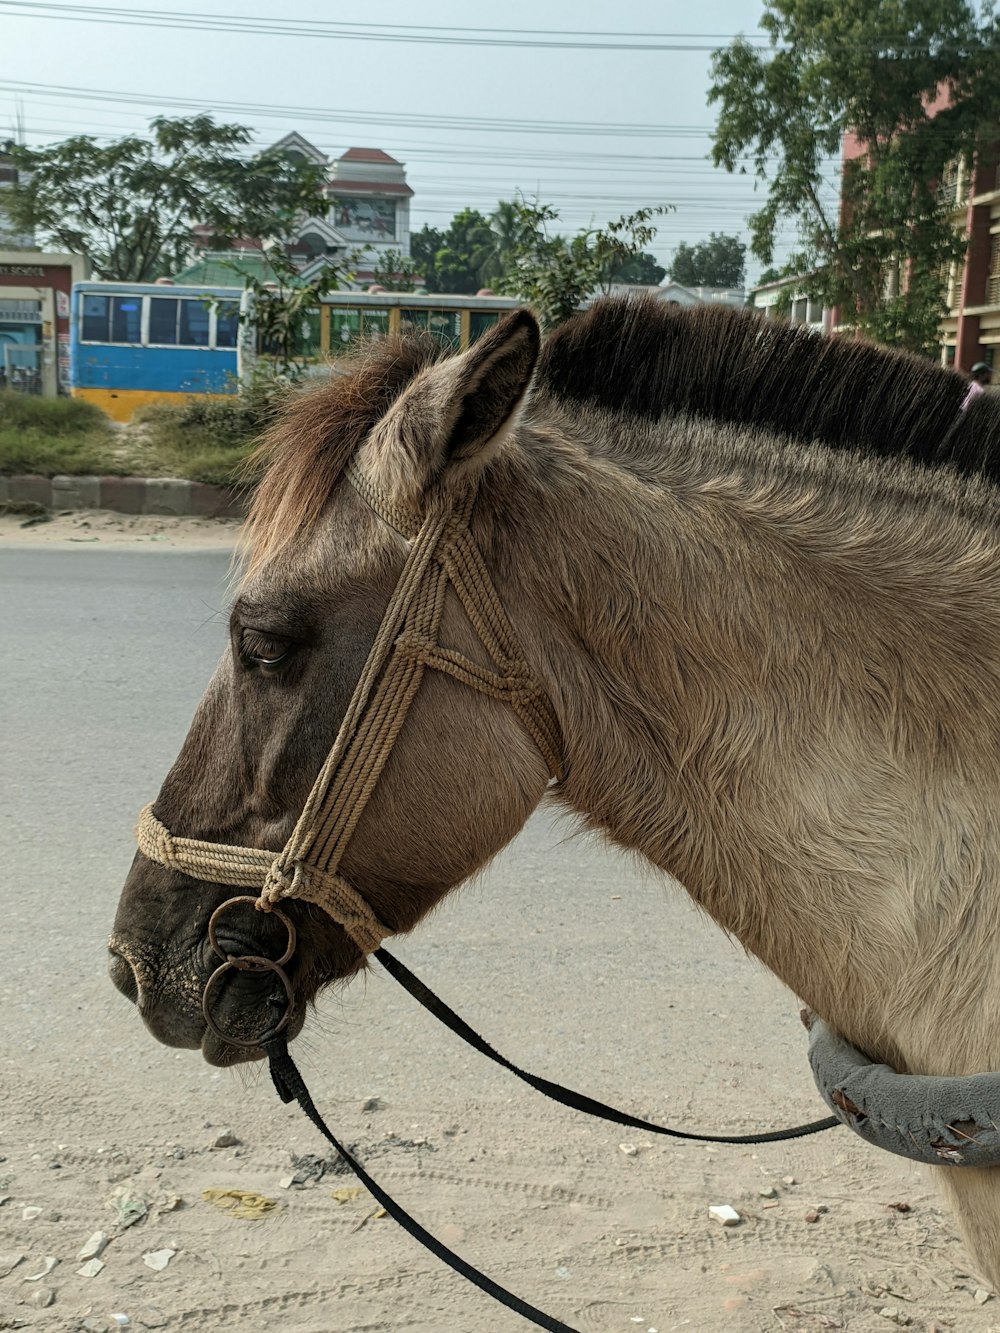 a close up of a horse with a bridle on